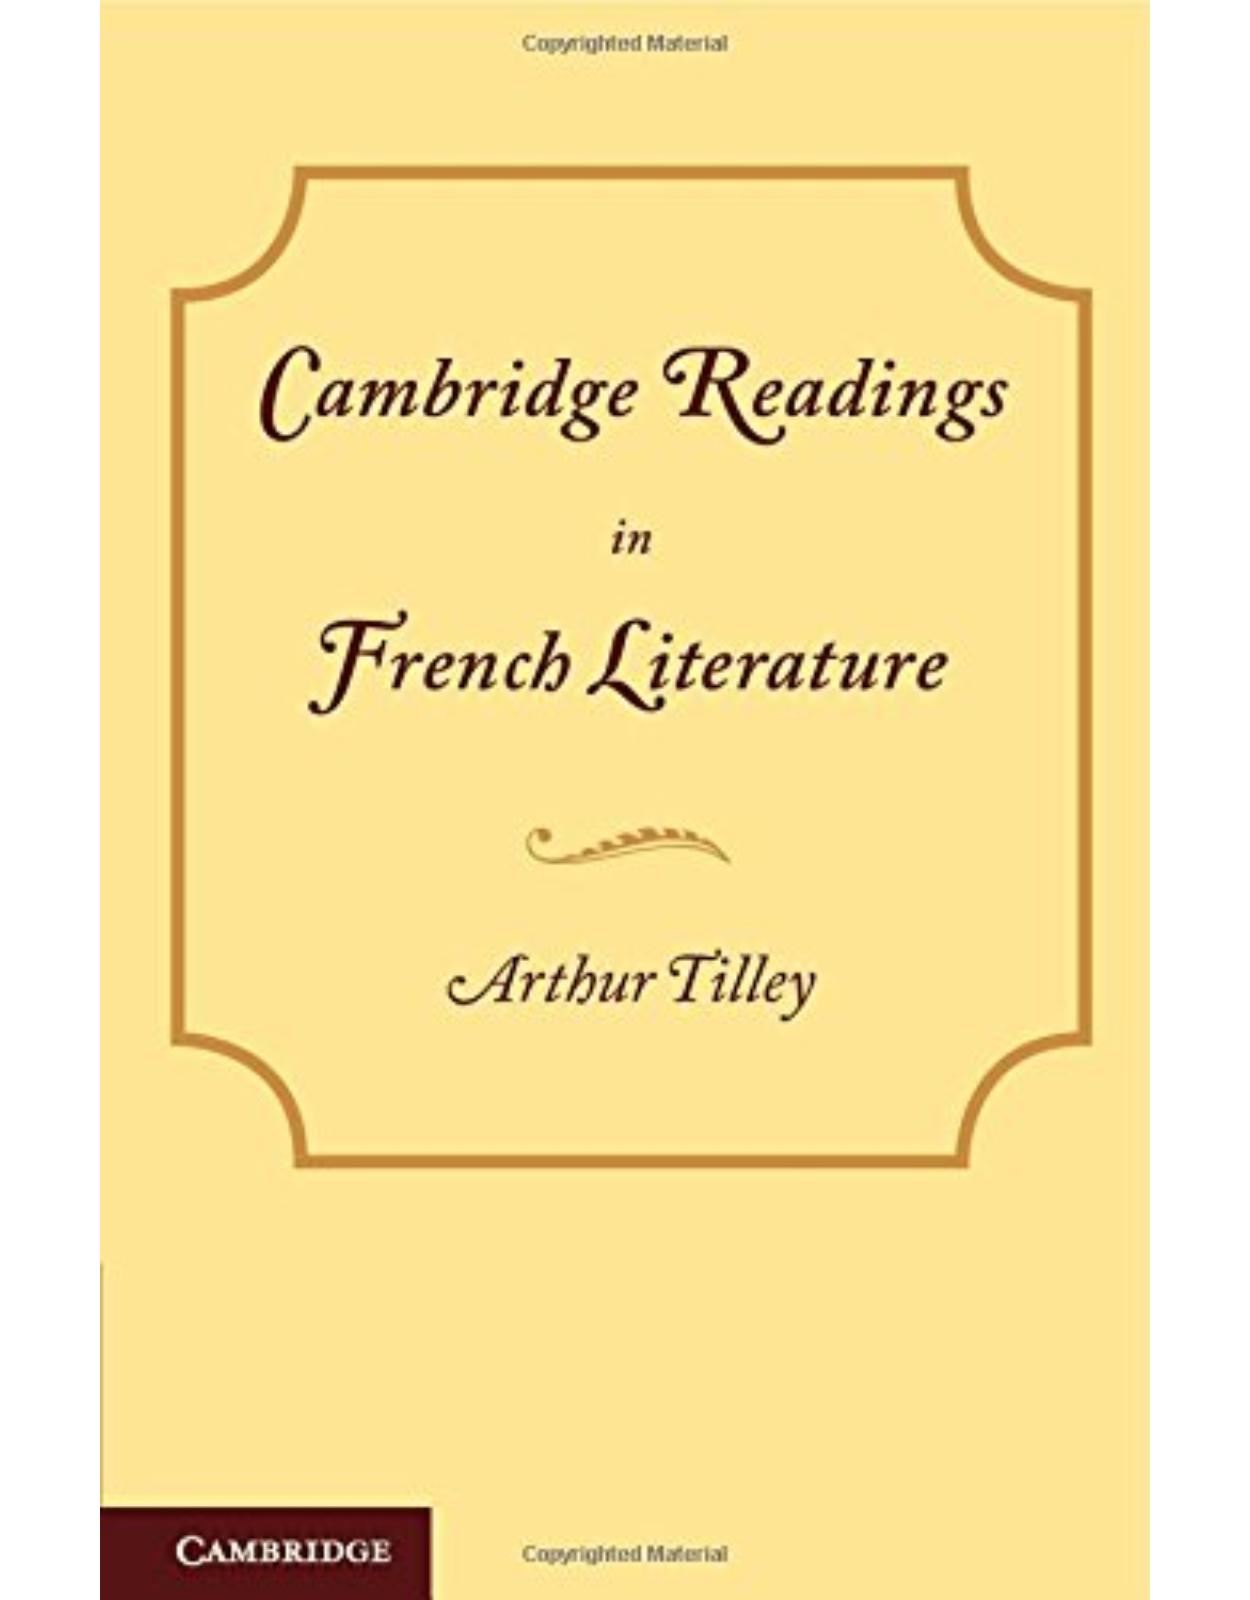 Cambridge Readings in French Literature